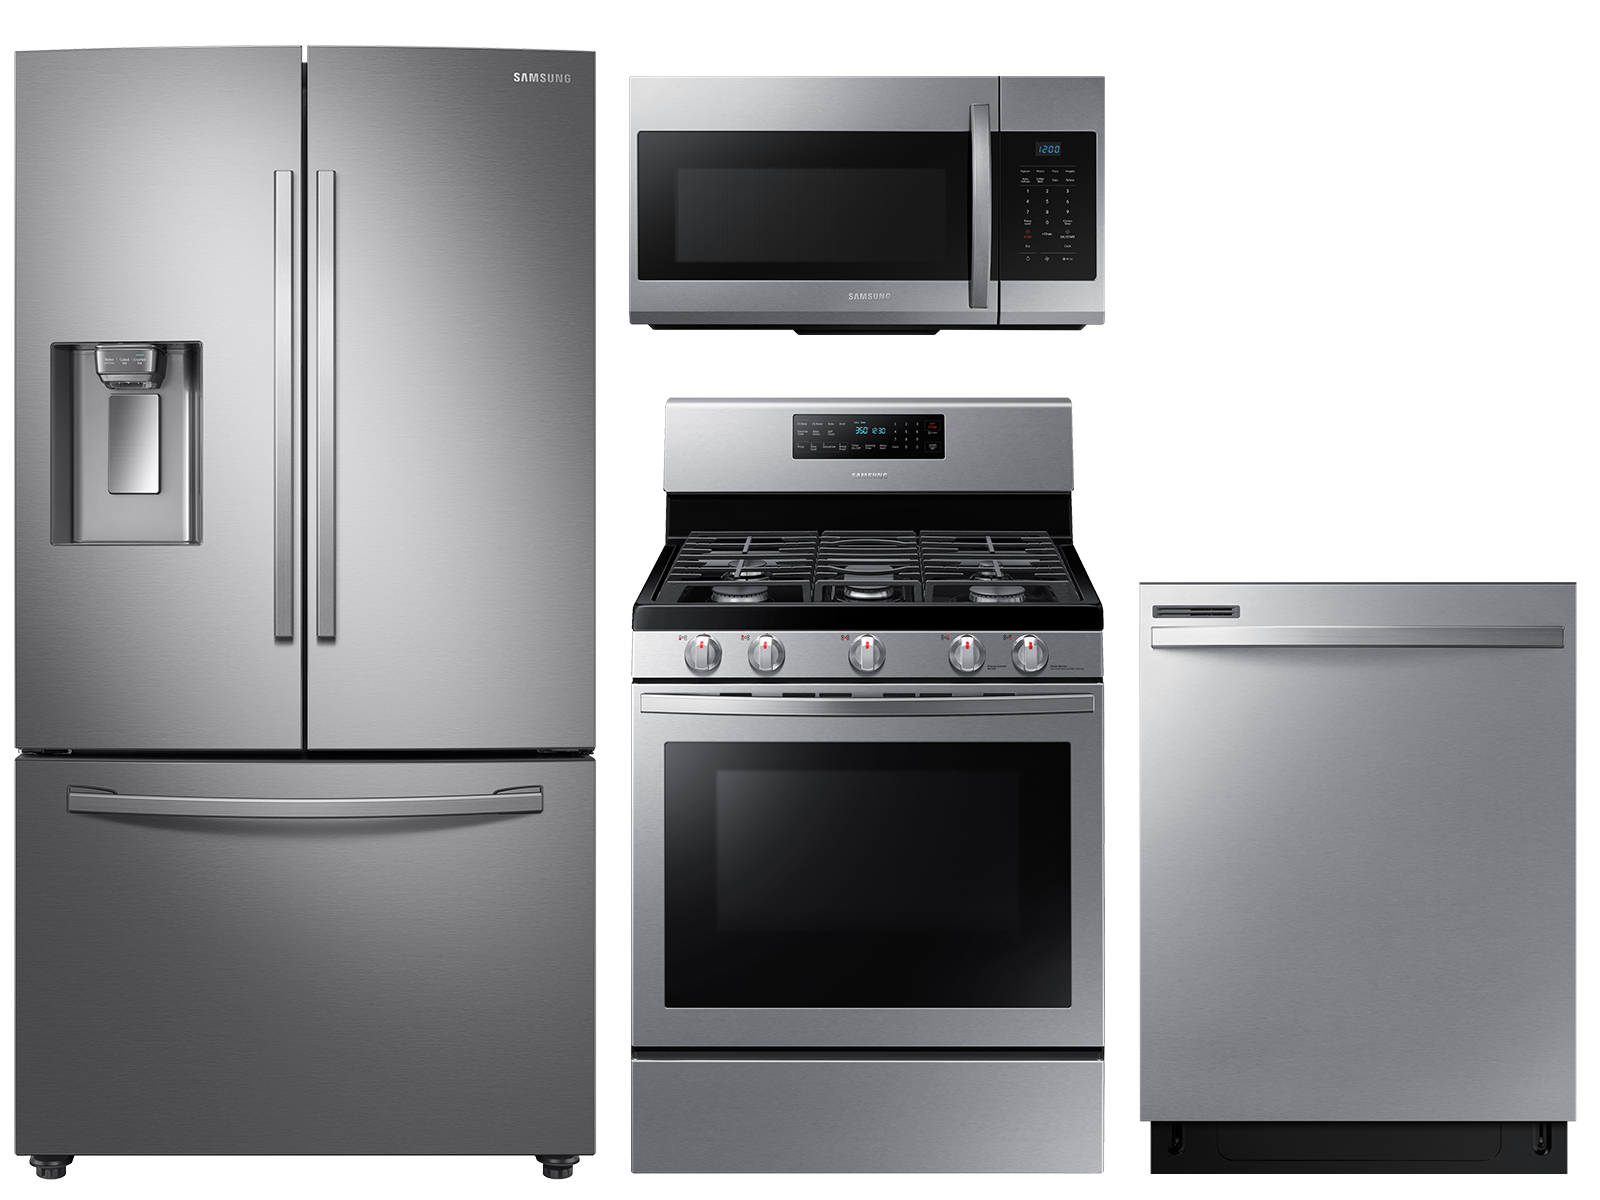 Samsung Large Capacity 3-door Refrigerator + Gas Range with Convection + 55 dBA Dishwasher + Microwave in Stainless Steel(BNDL-1646291342899)